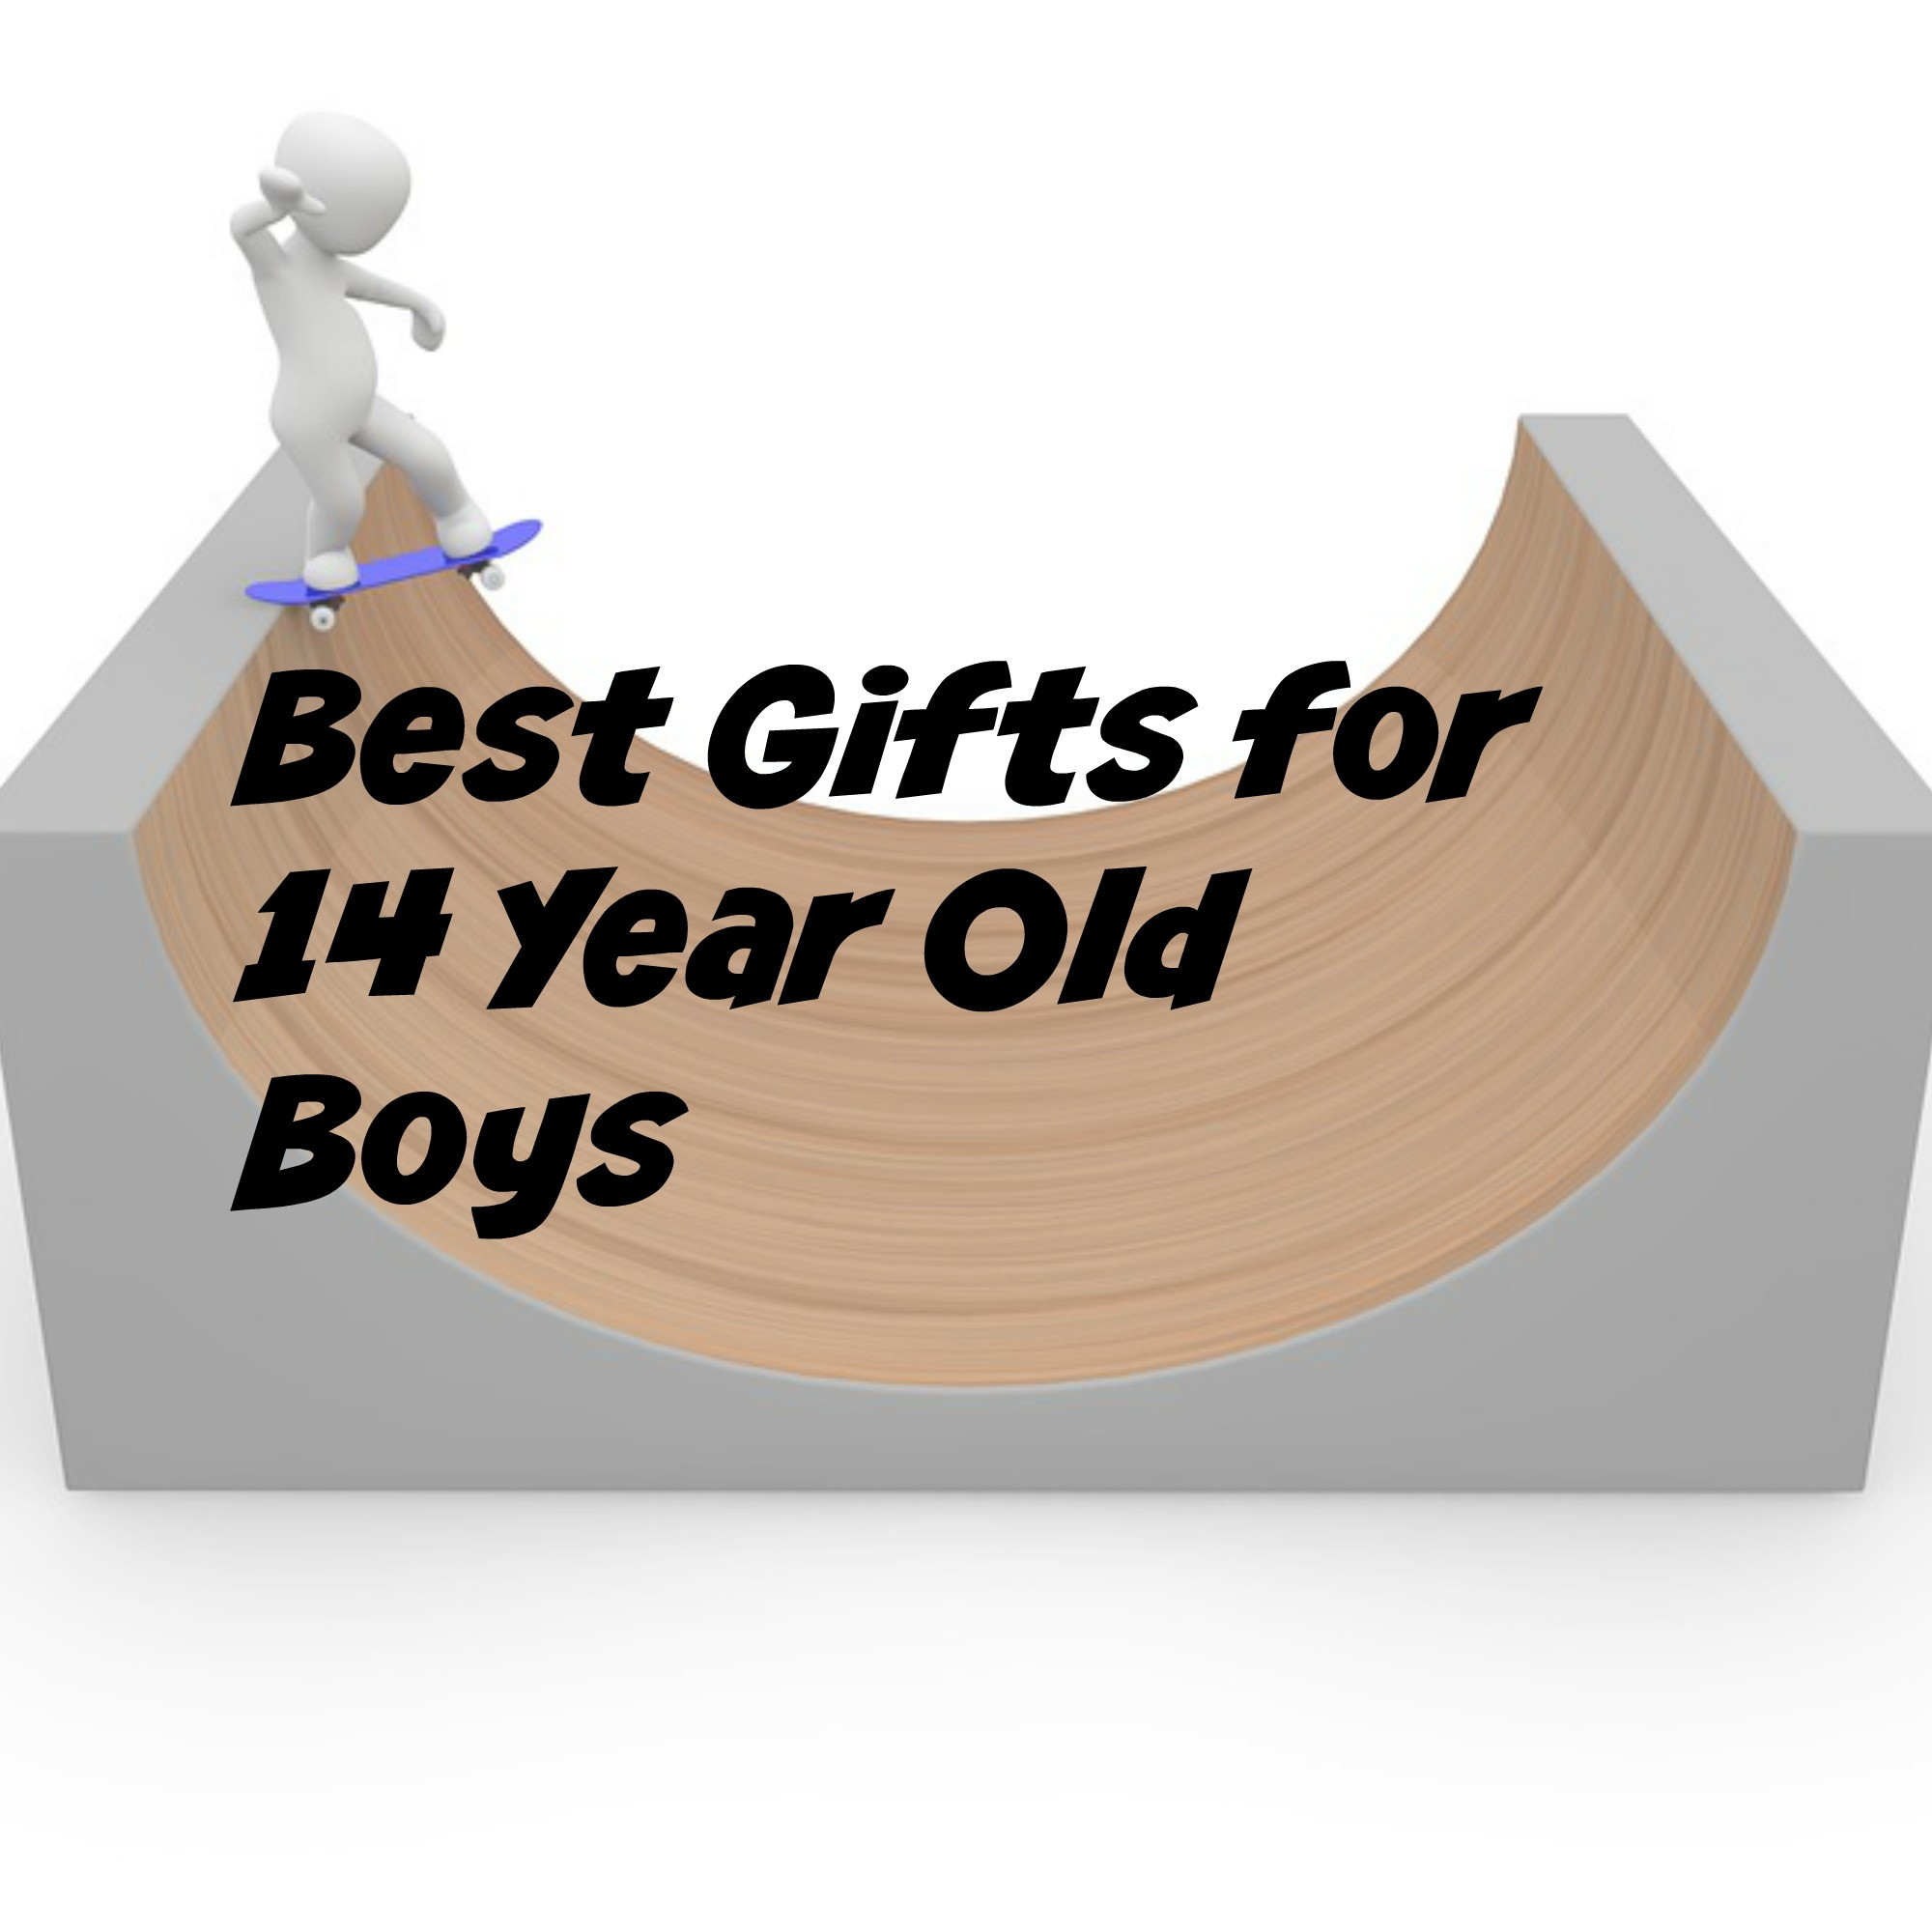 Gift Ideas For 14 Year Old Boys
 Best Gifts for 14 Year Old Boys Birthdays and Christmas